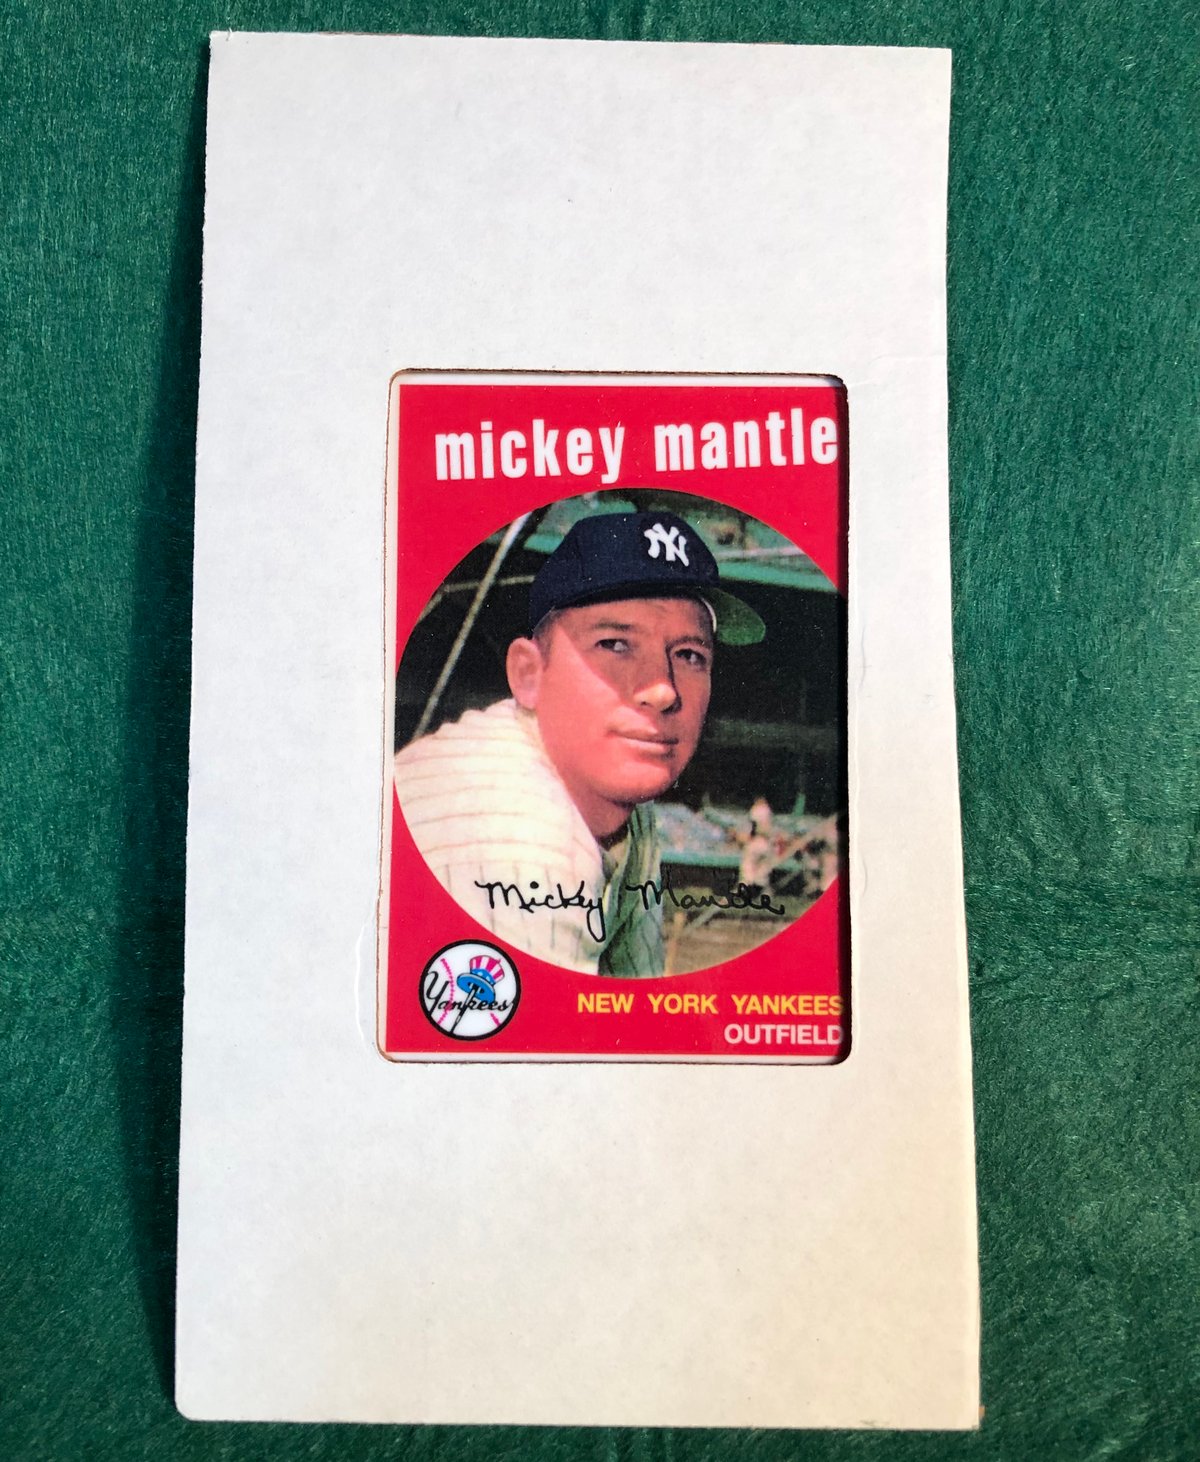 Image of Ceramic Mickey Mantle 1959 repro bb card